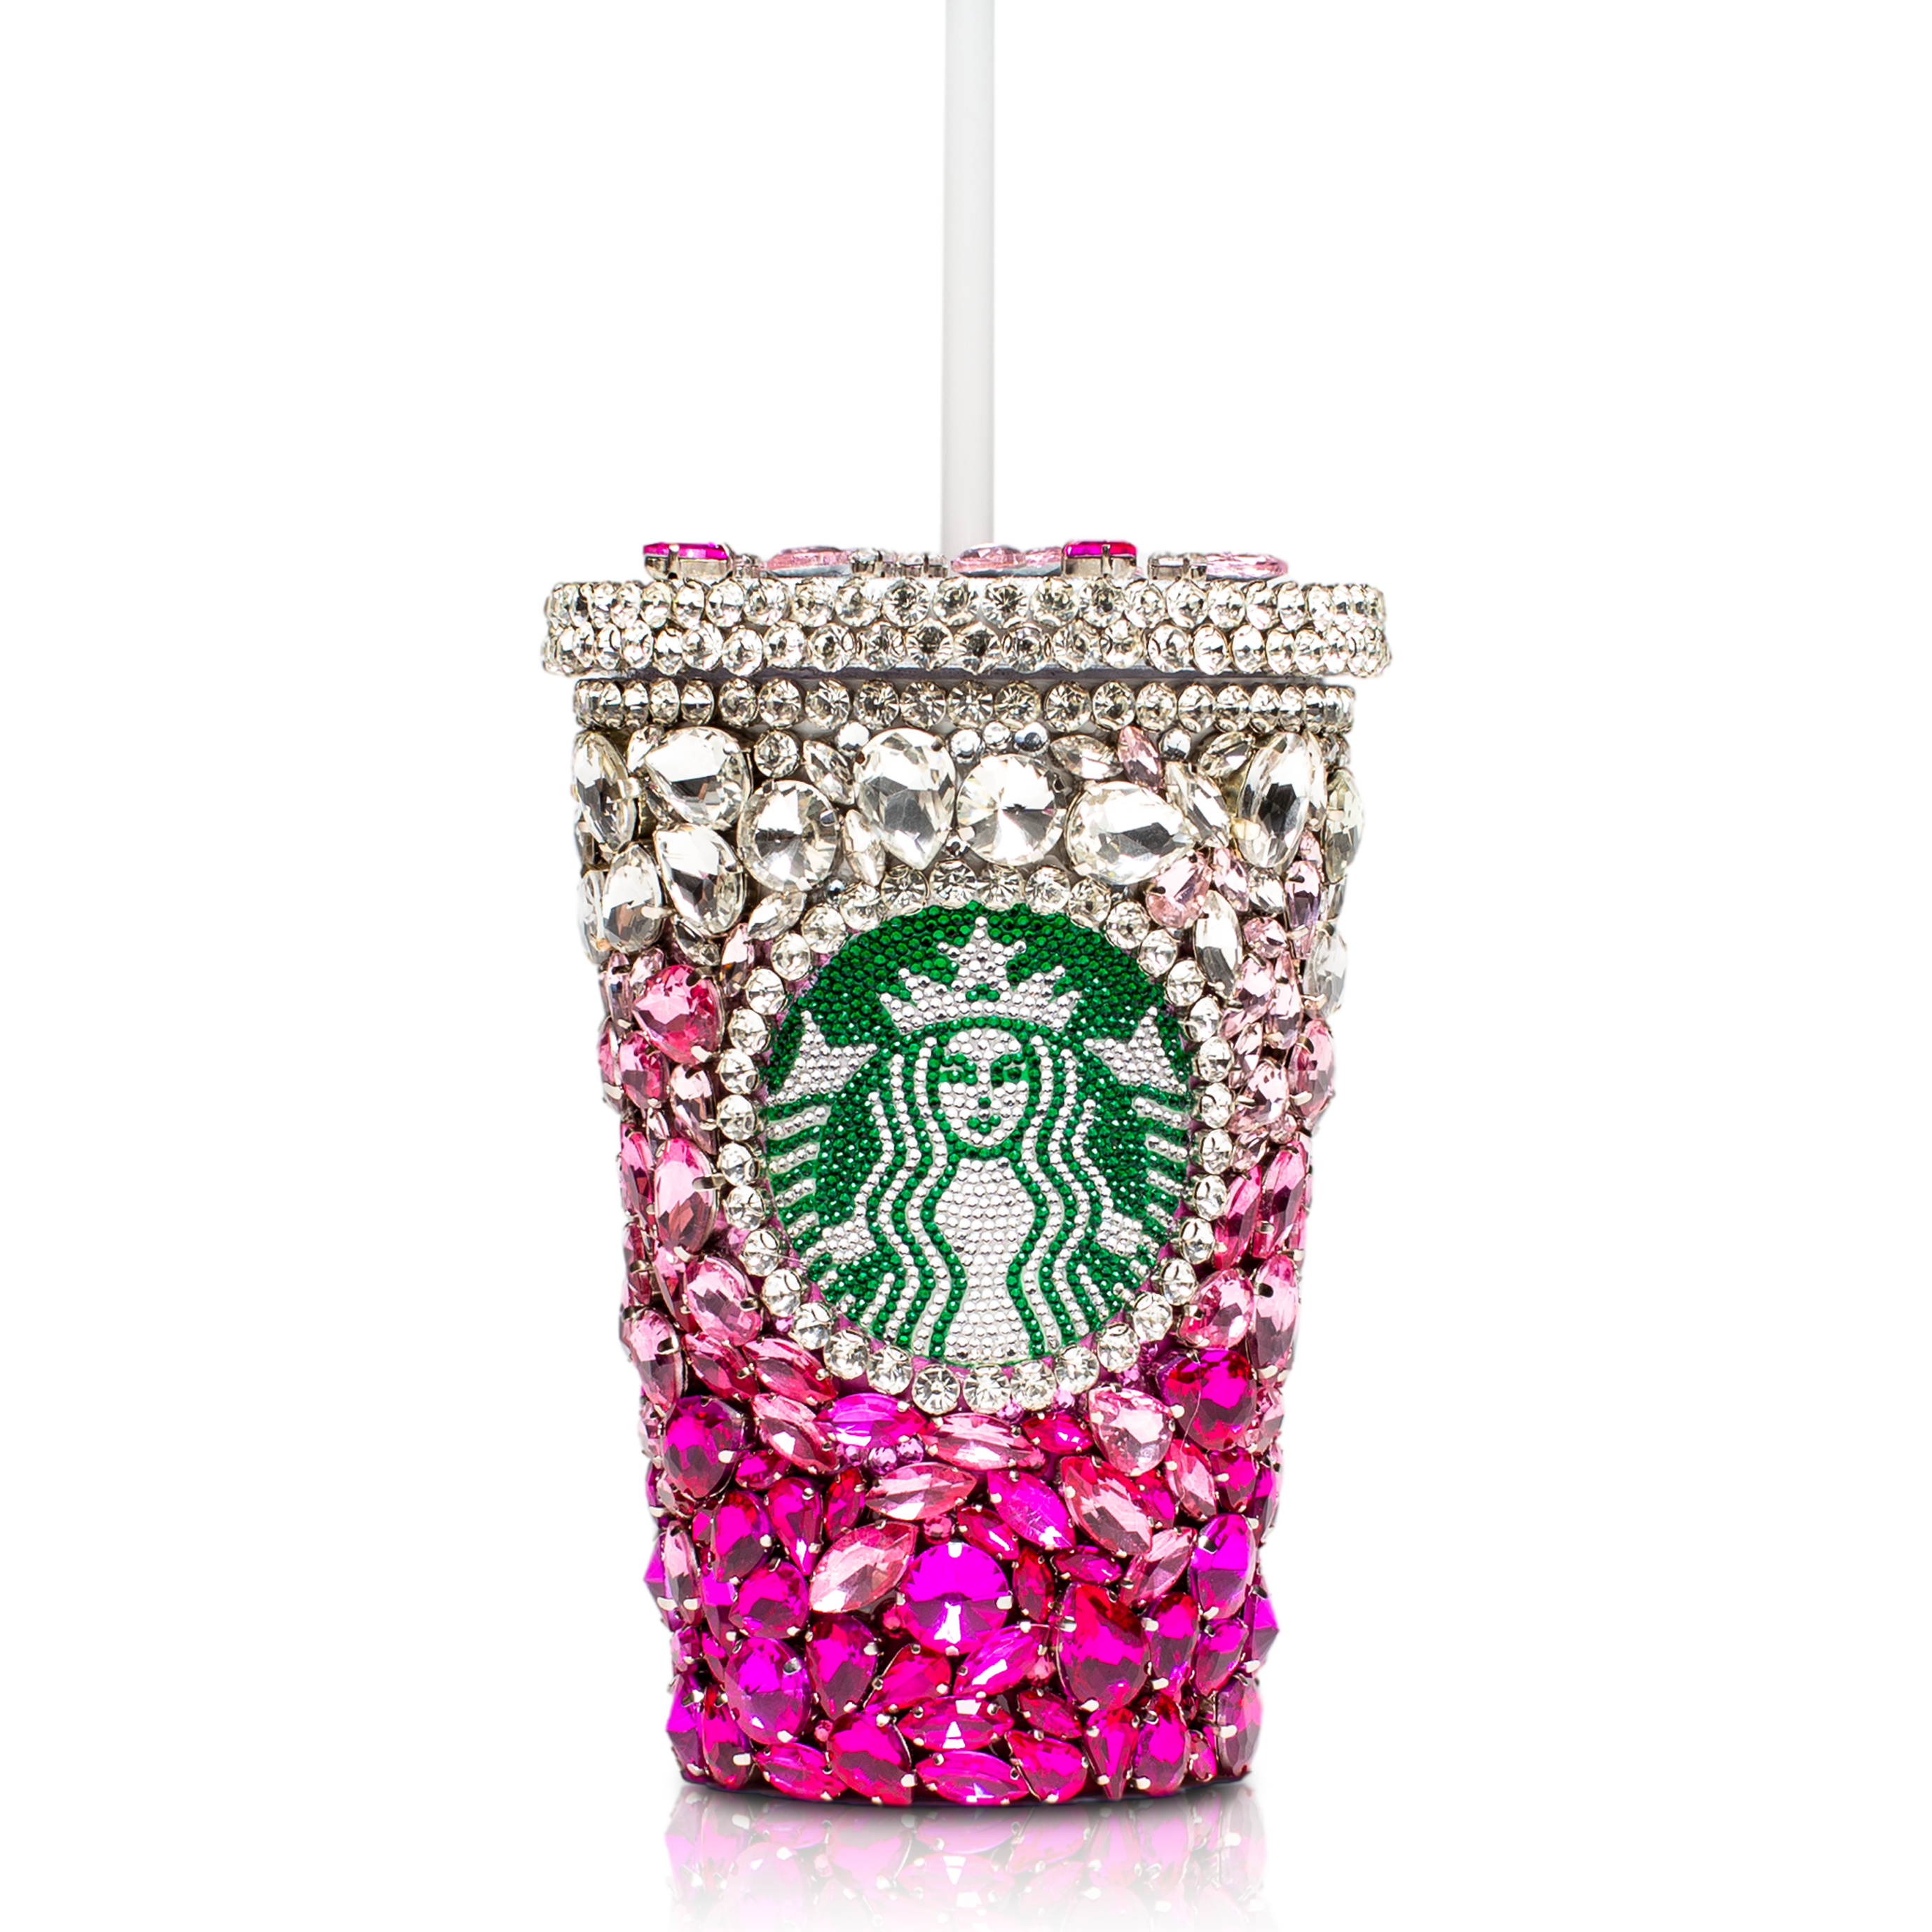 Crystal Starbucks Cup - Ombre Pink